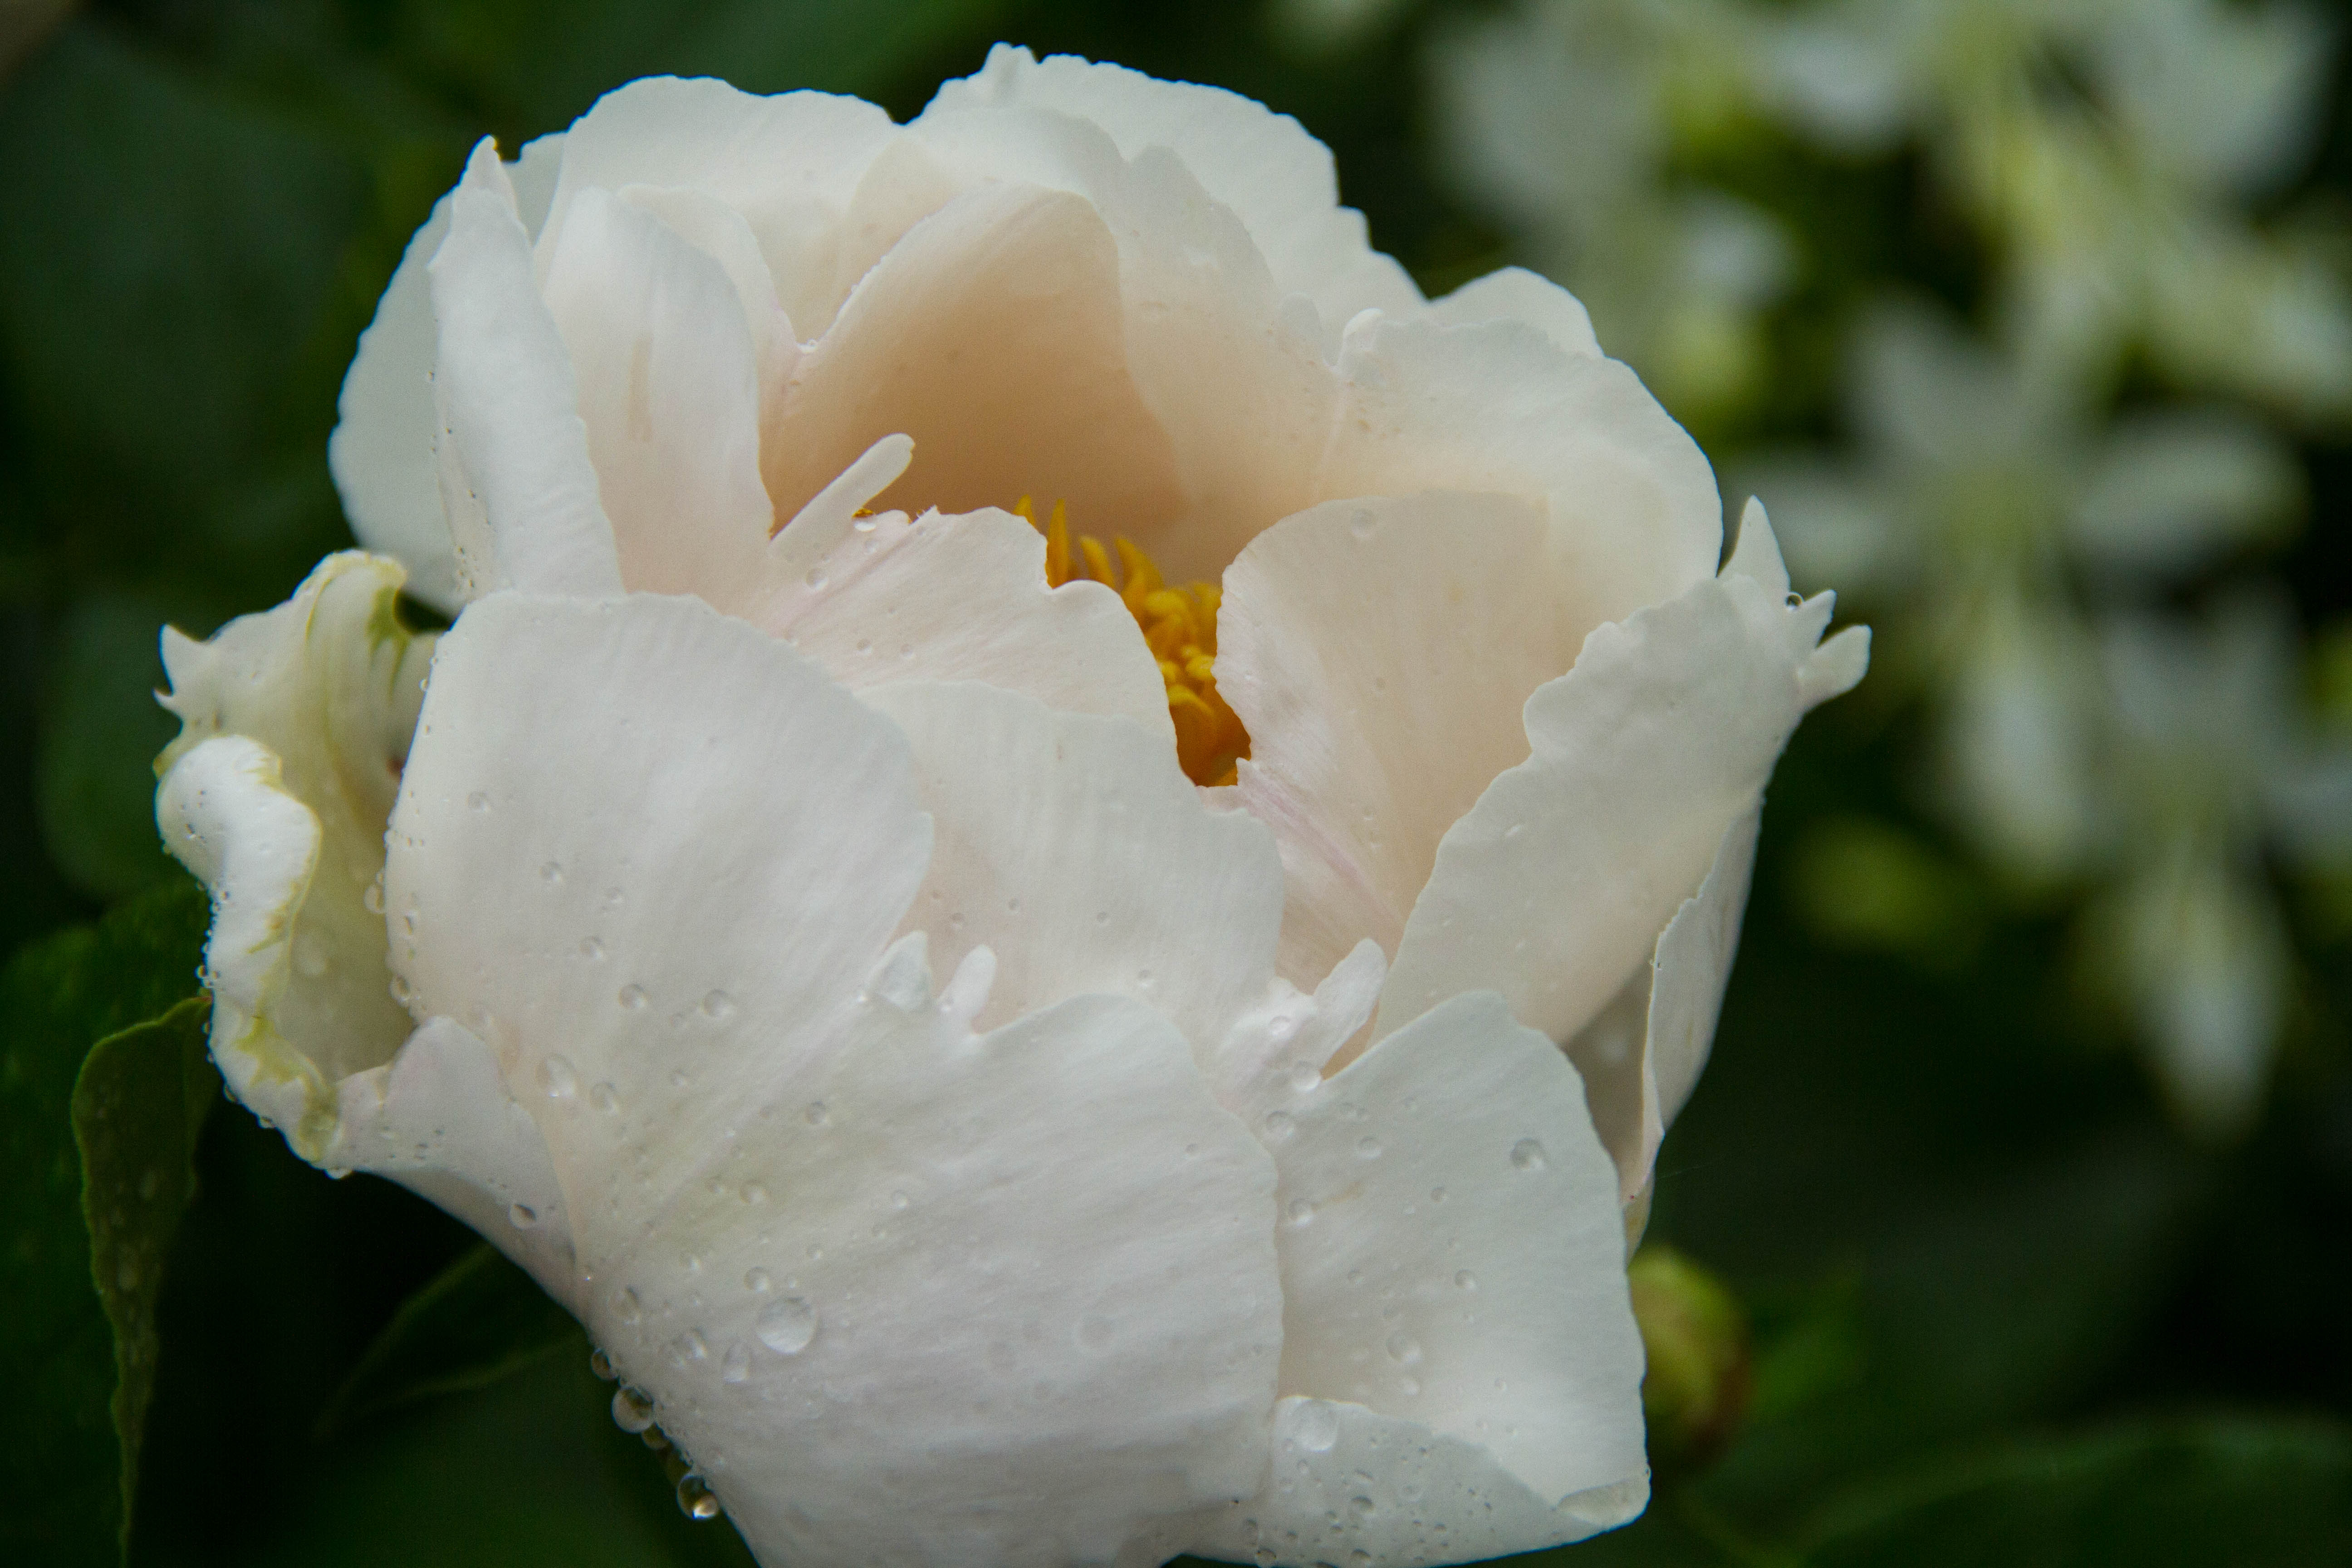 The many petals of this peony capture raindrops.